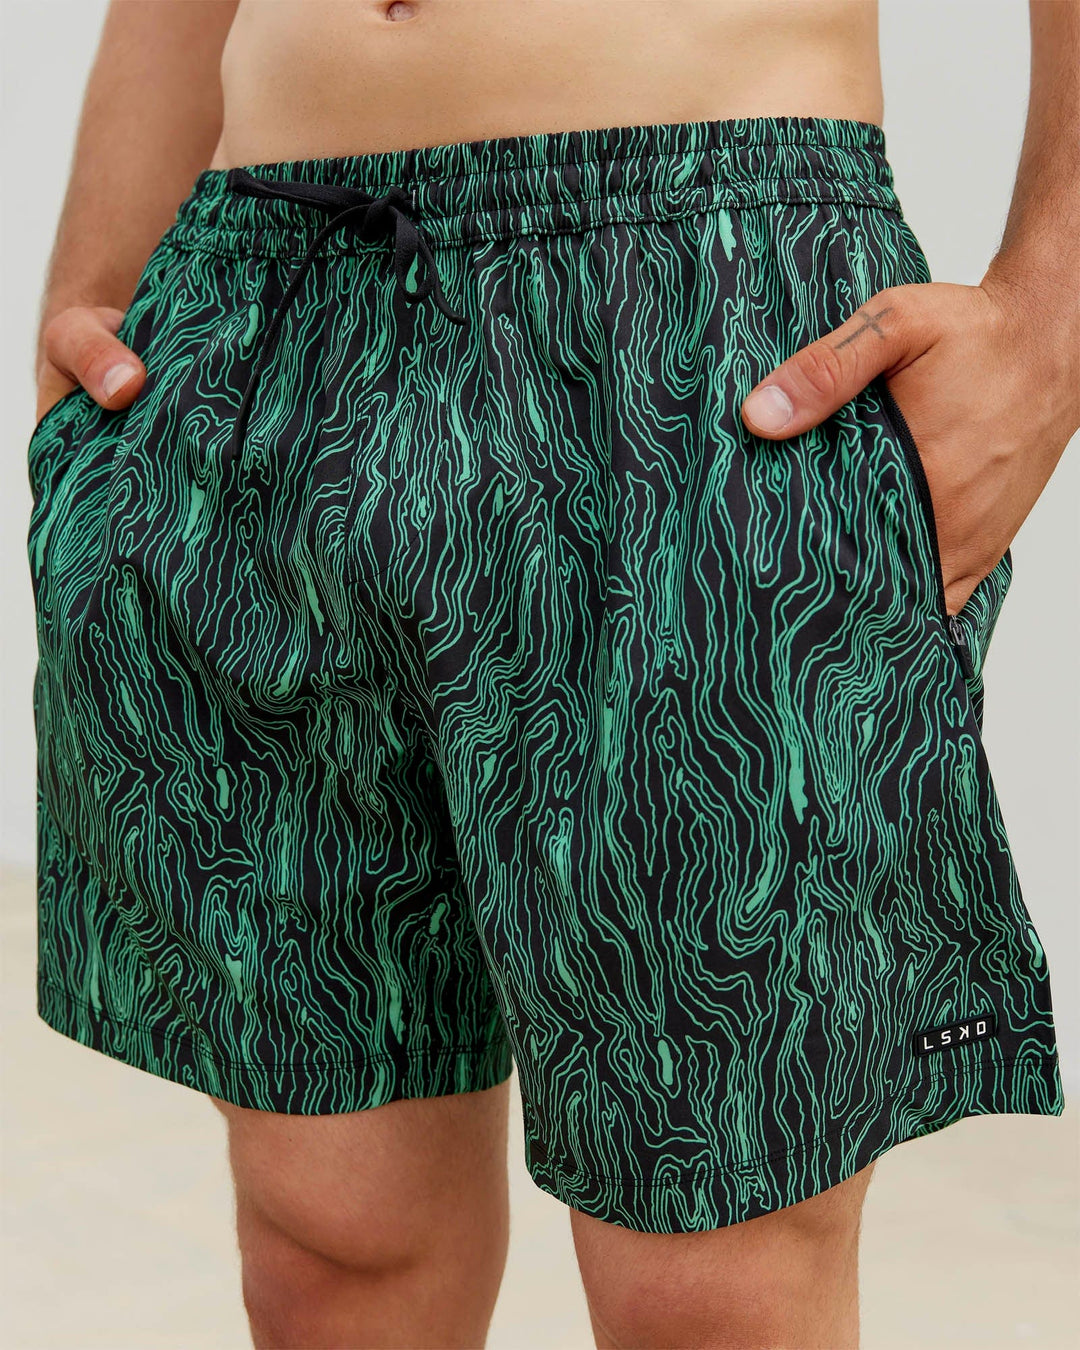 Man wearing Rep 7'' Performance Shorts - Topographic Black-Lime